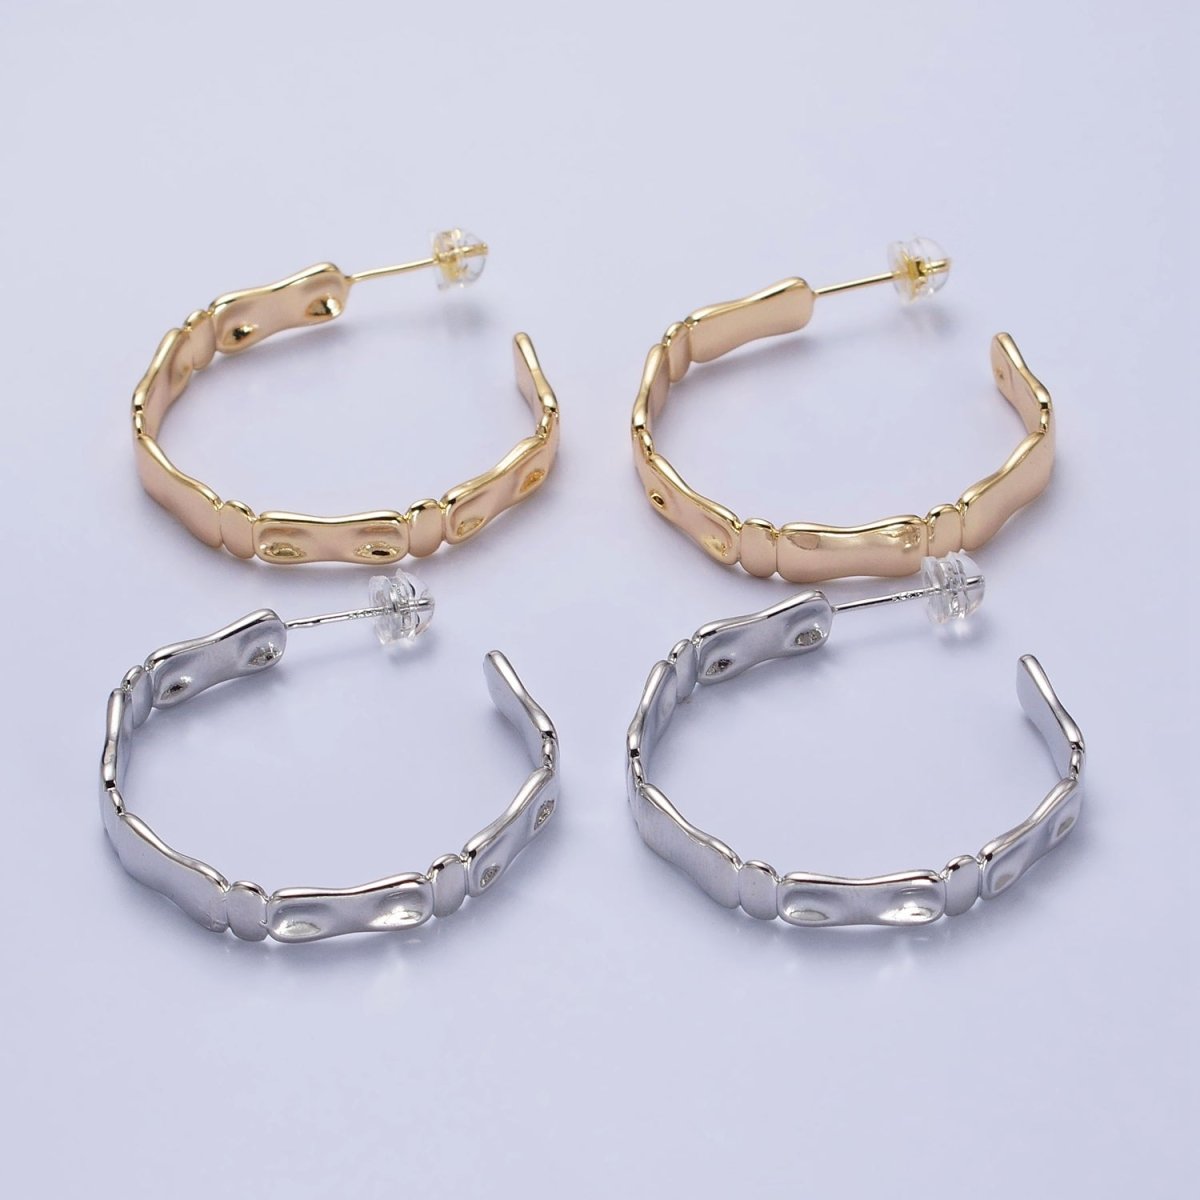 35mm Hammered Geometric C-Shaped Hoop Earrings in Gold & Silver | AB354 AB355 - DLUXCA